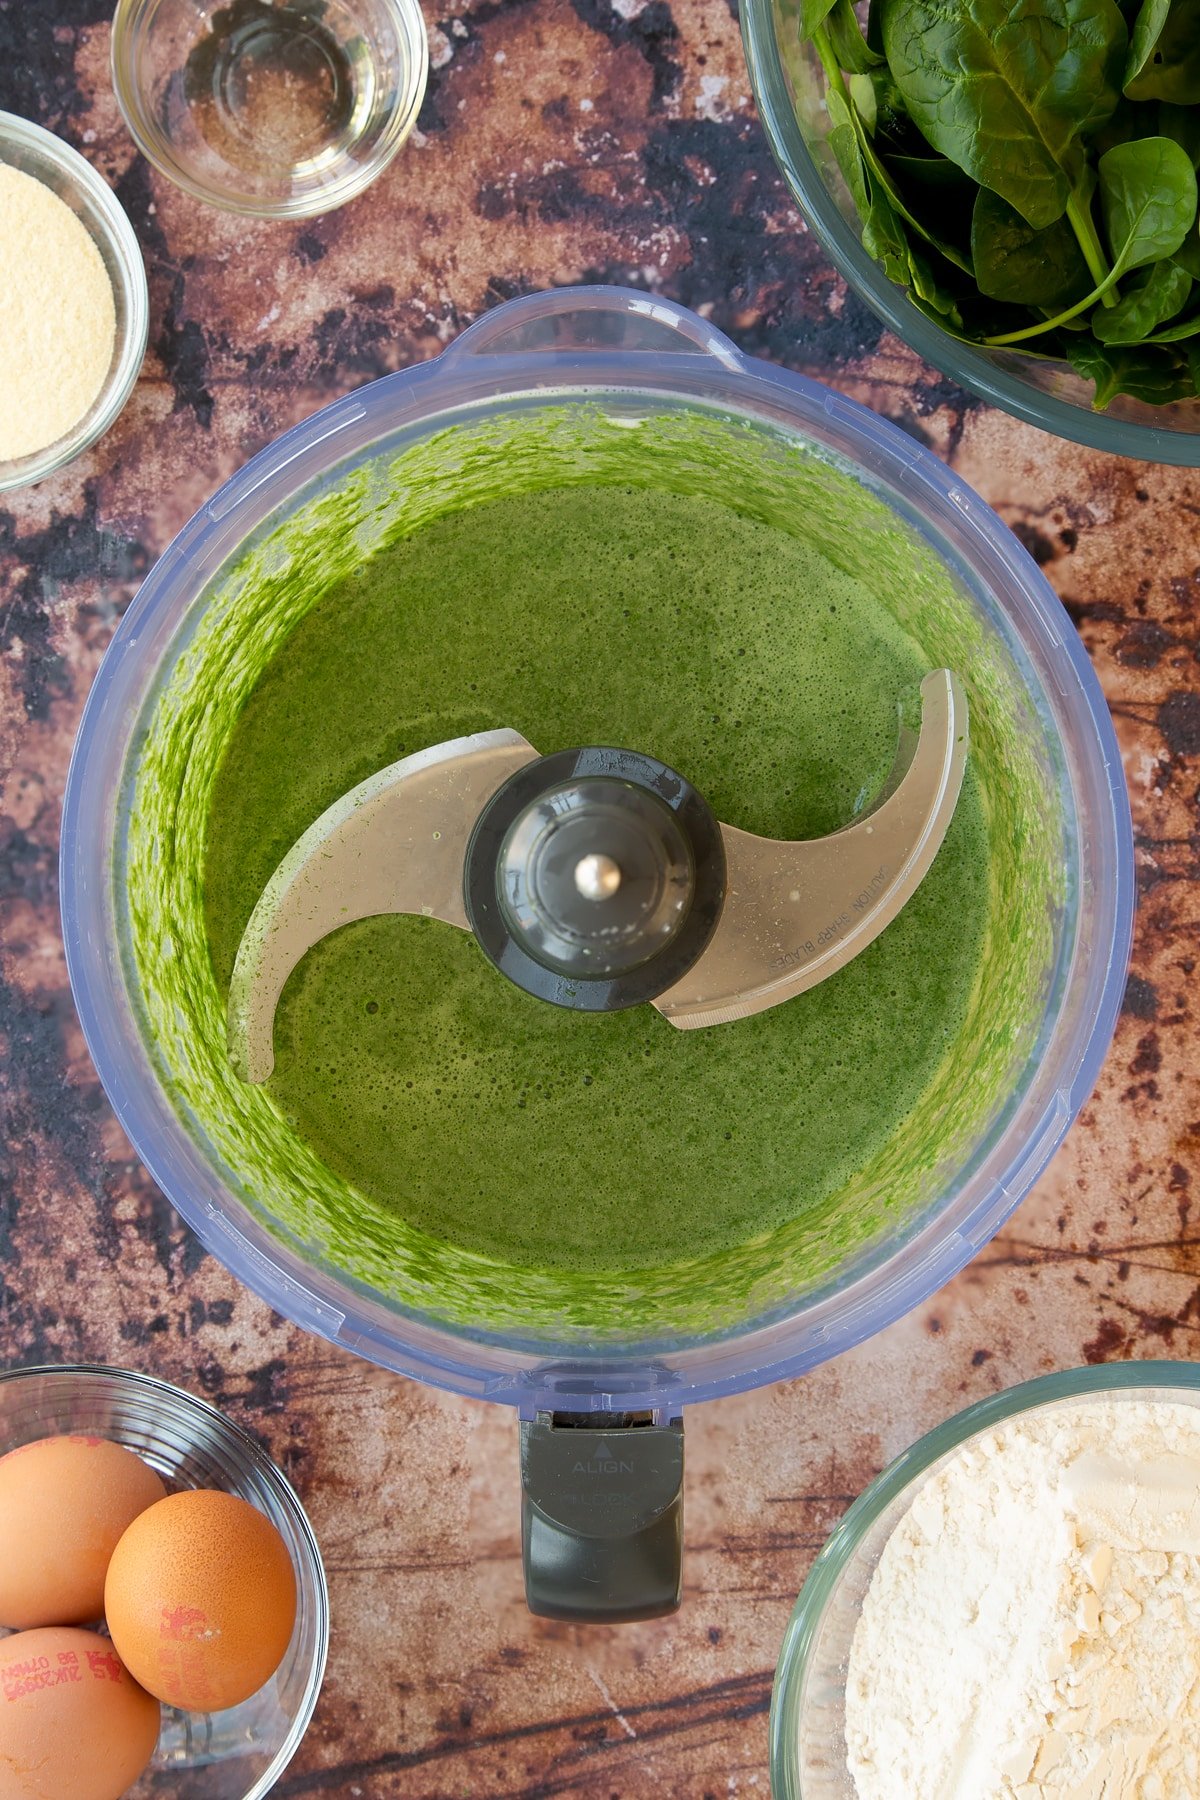 ccombined spinach and egg mixture in a food processor.